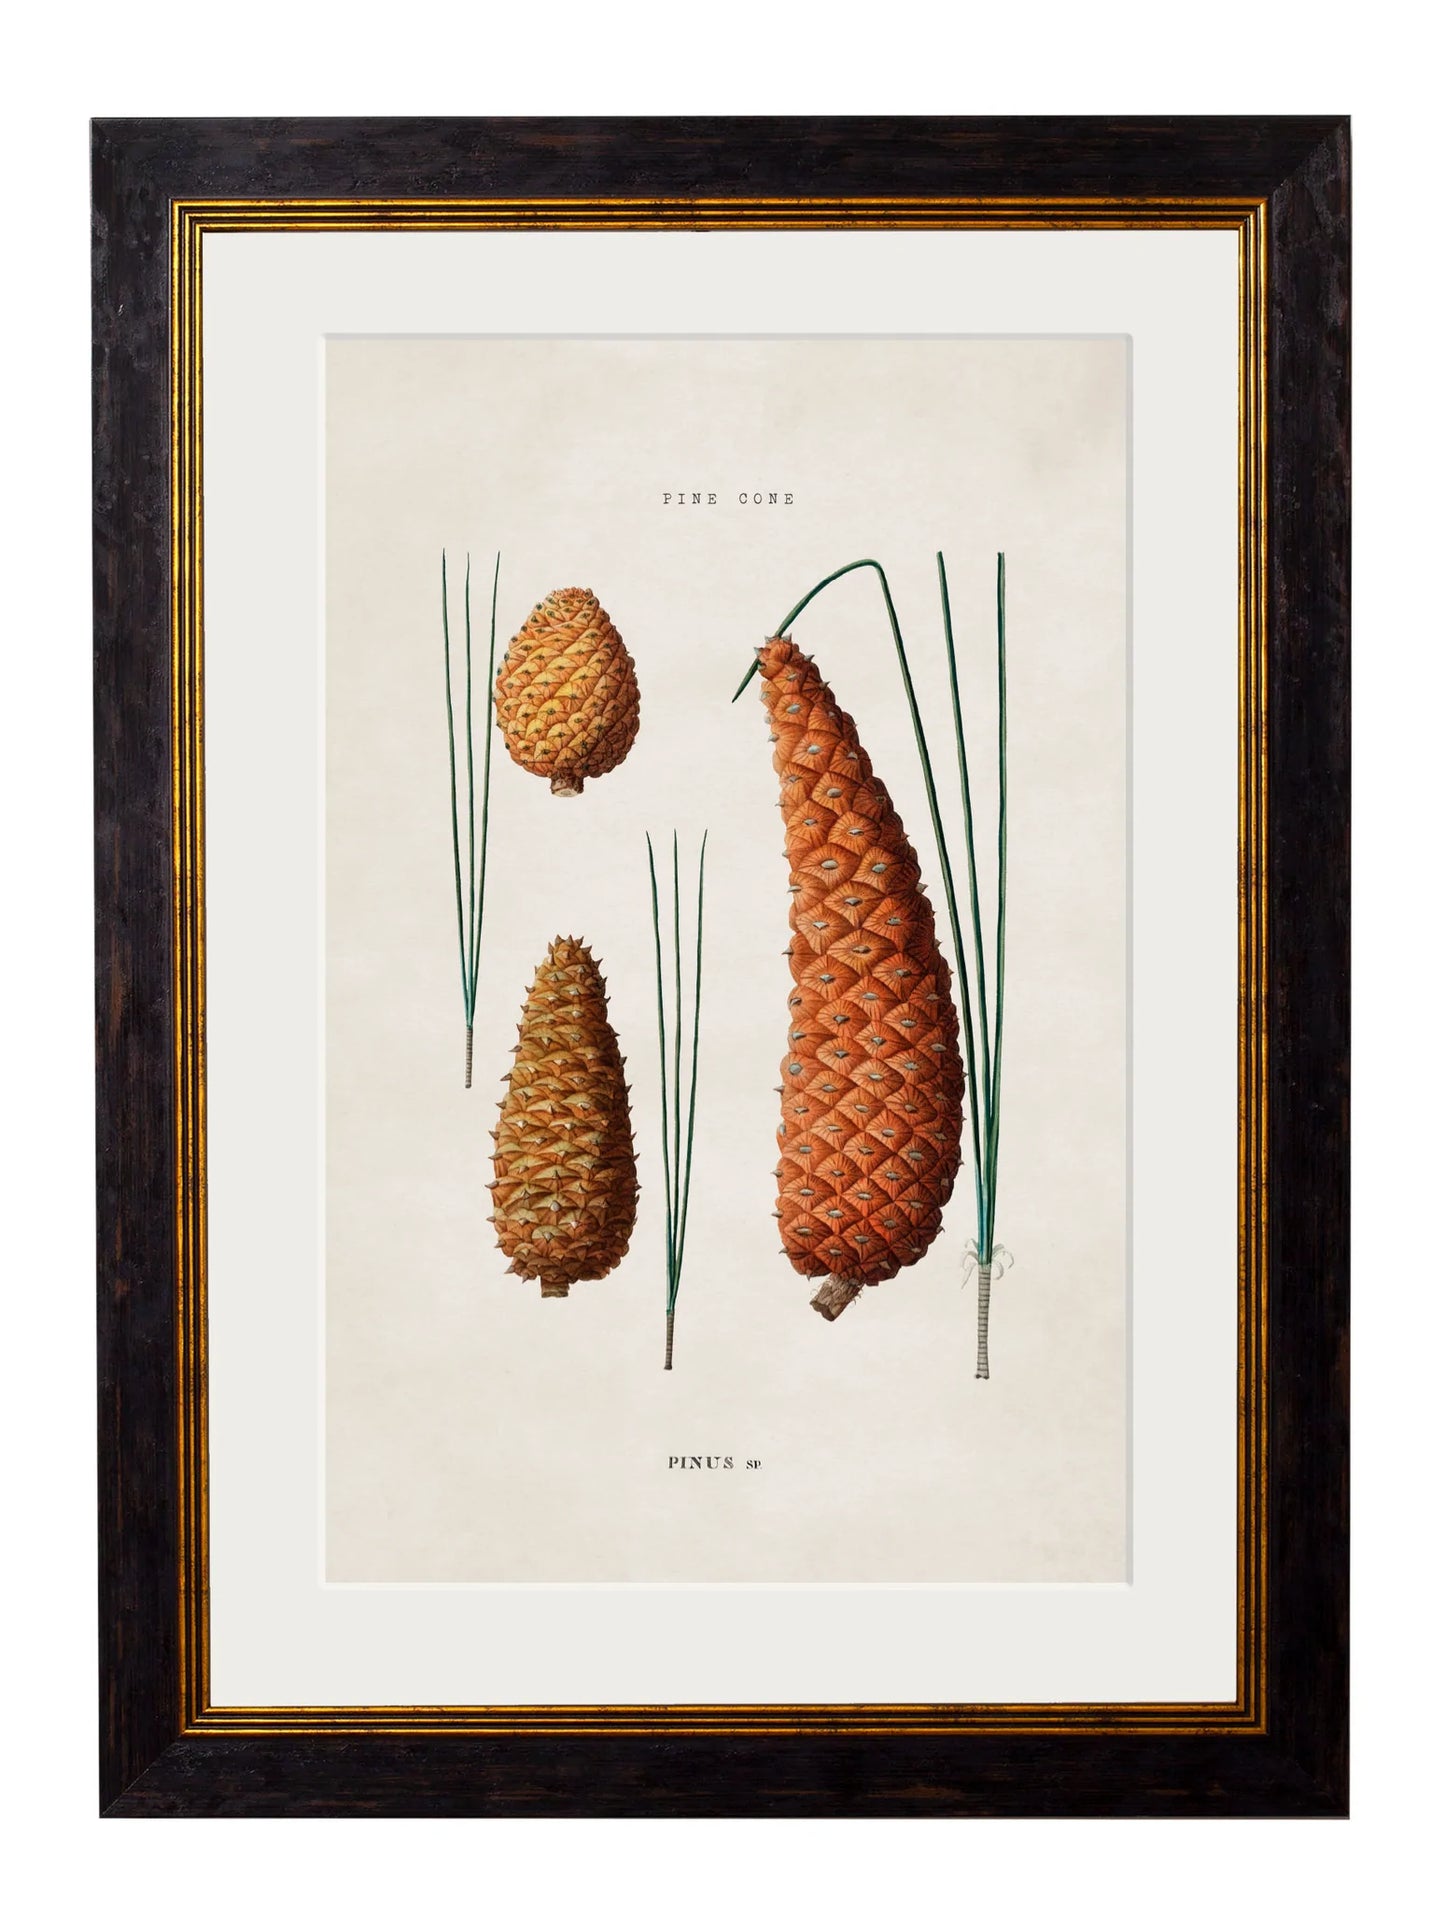 Framed Study of British Leaves & Pinecones